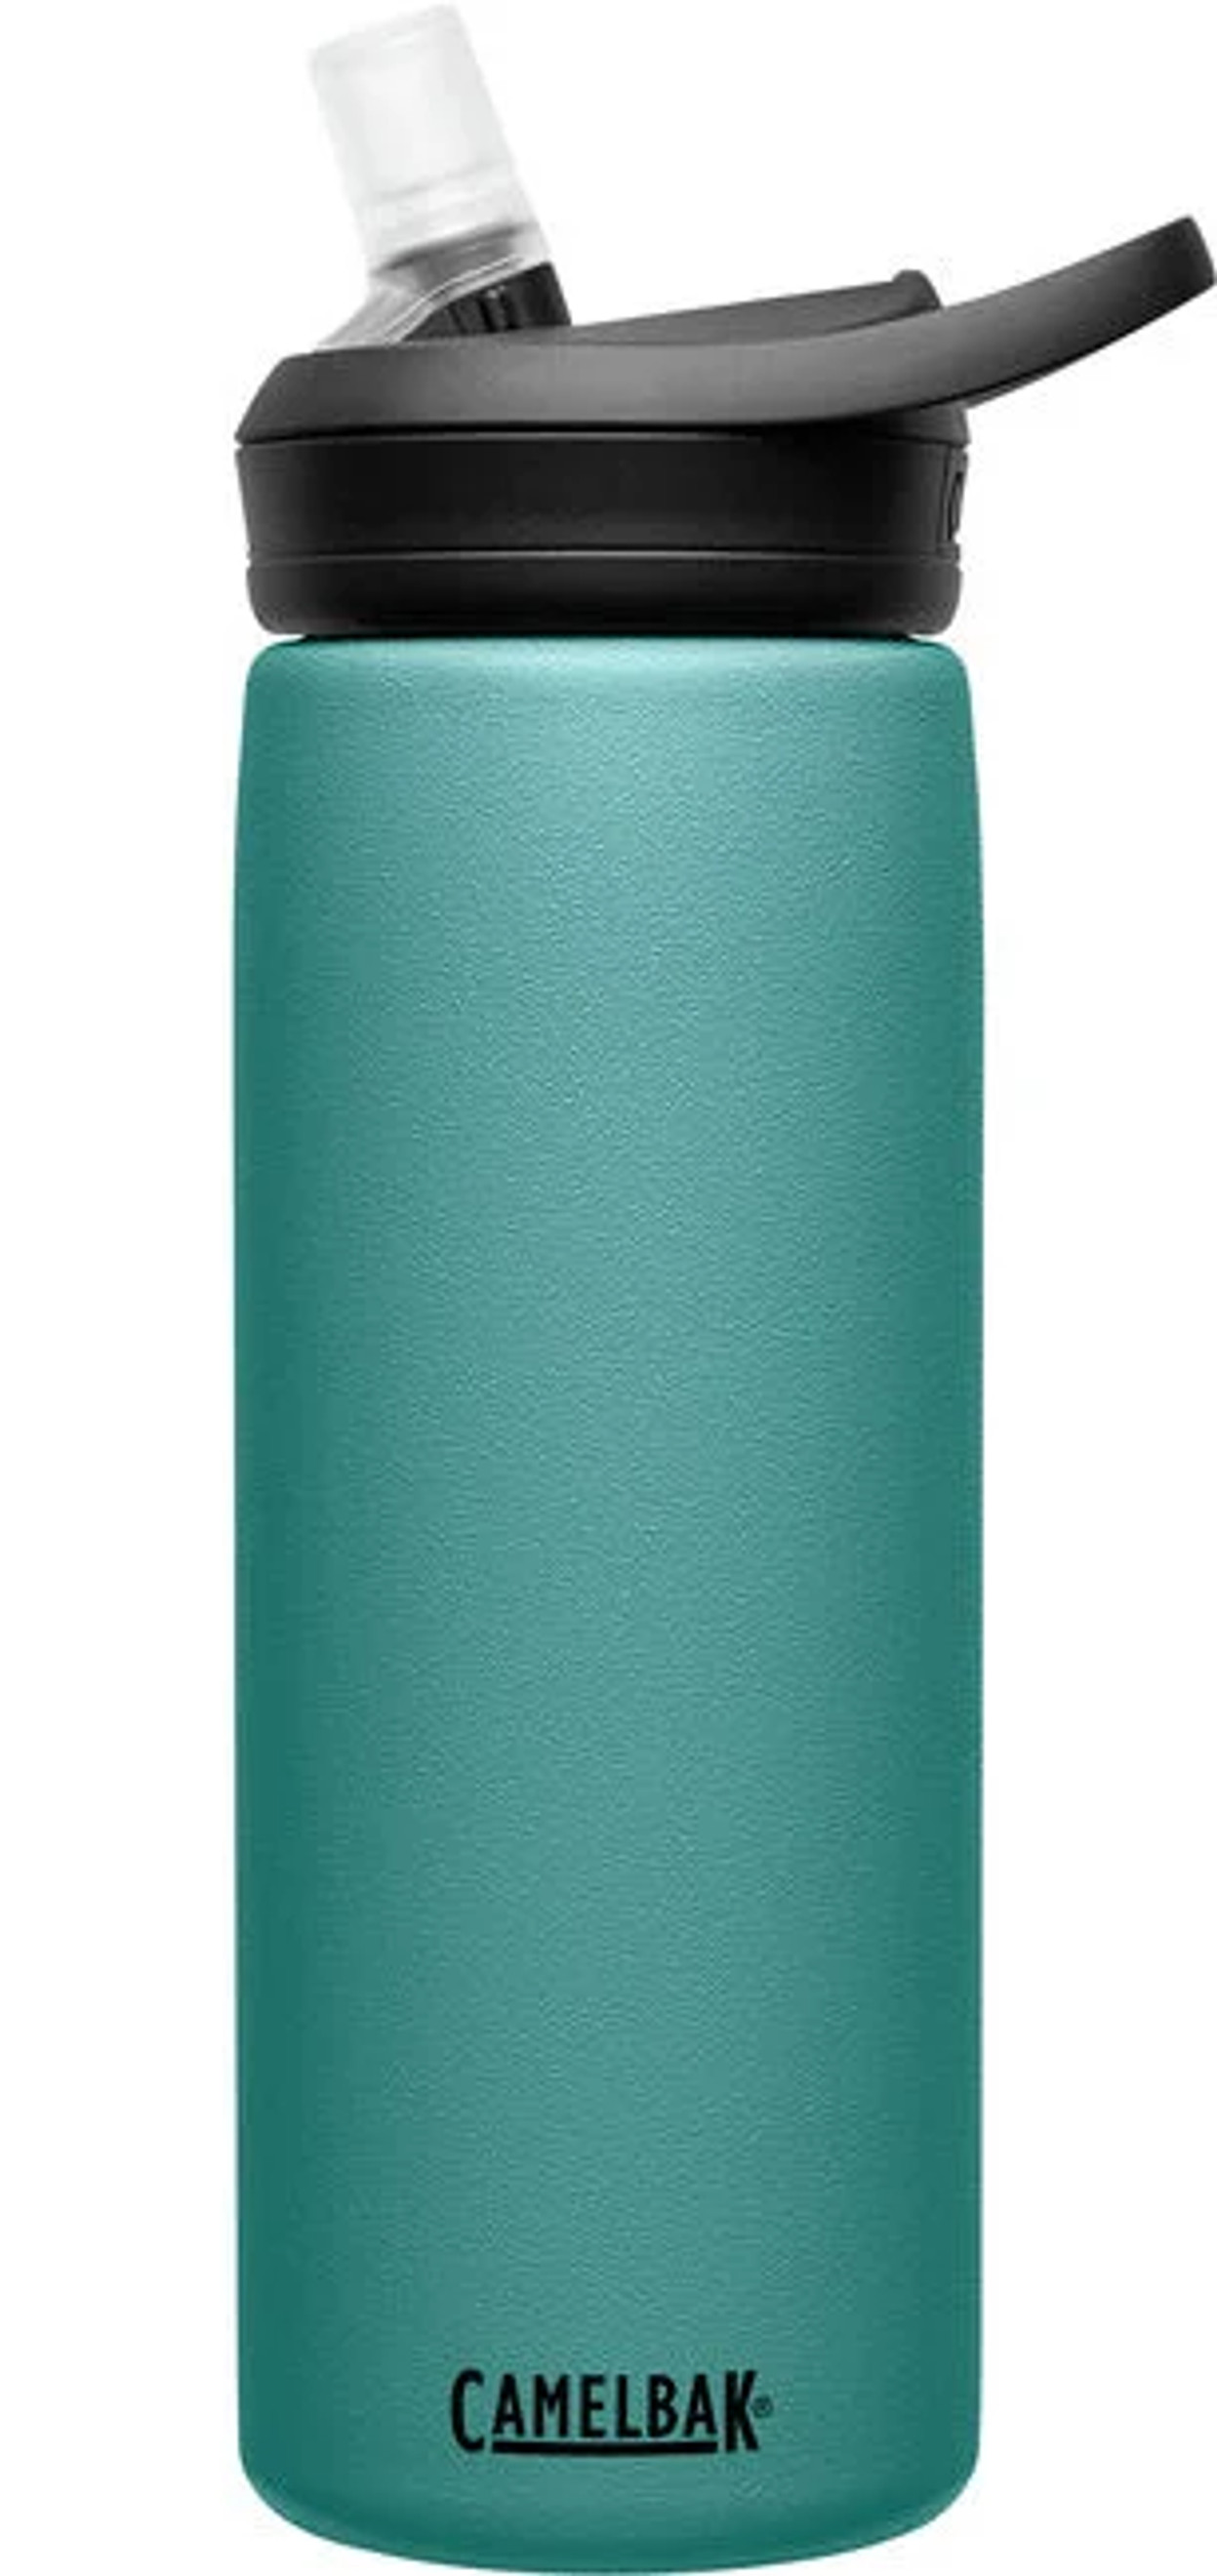 Eddy+ Vacuum Insulated Stainless Steel Water Bottle - KRCB-1649406060